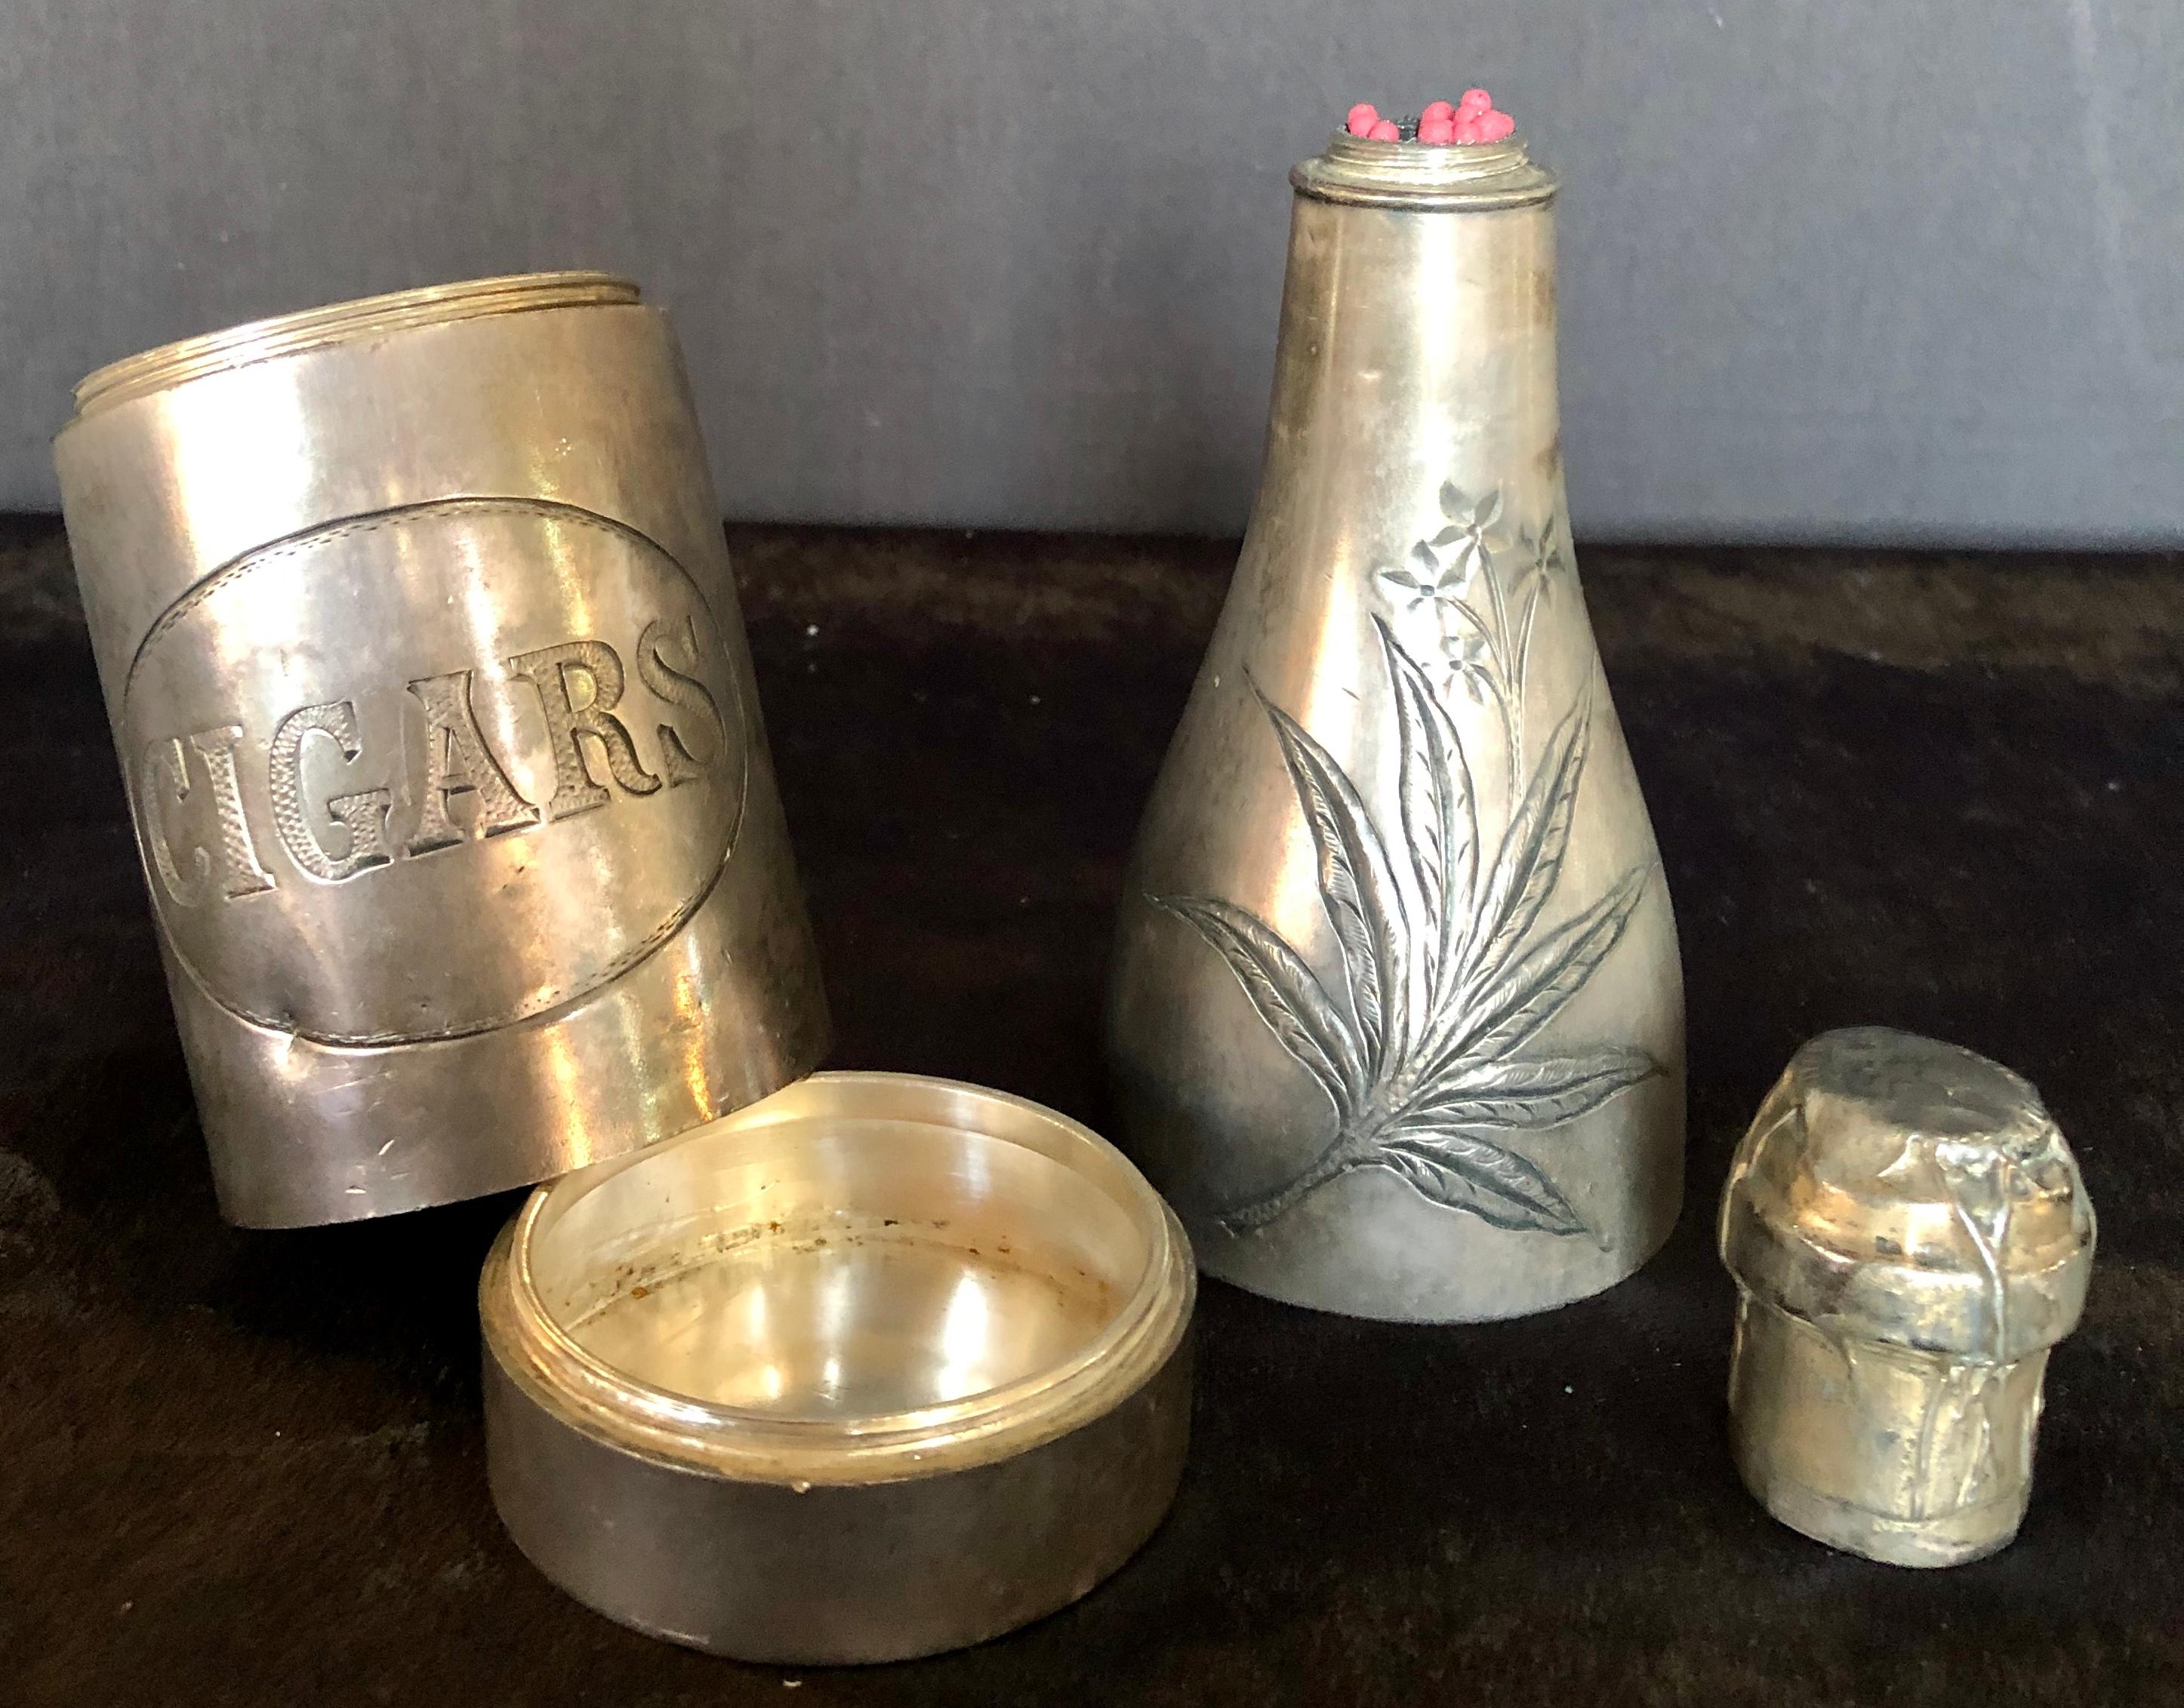 Silver Plate Champagne Bottle Cigar Holder Pairpoint Manufacturing.Co. Part of a Large Collec